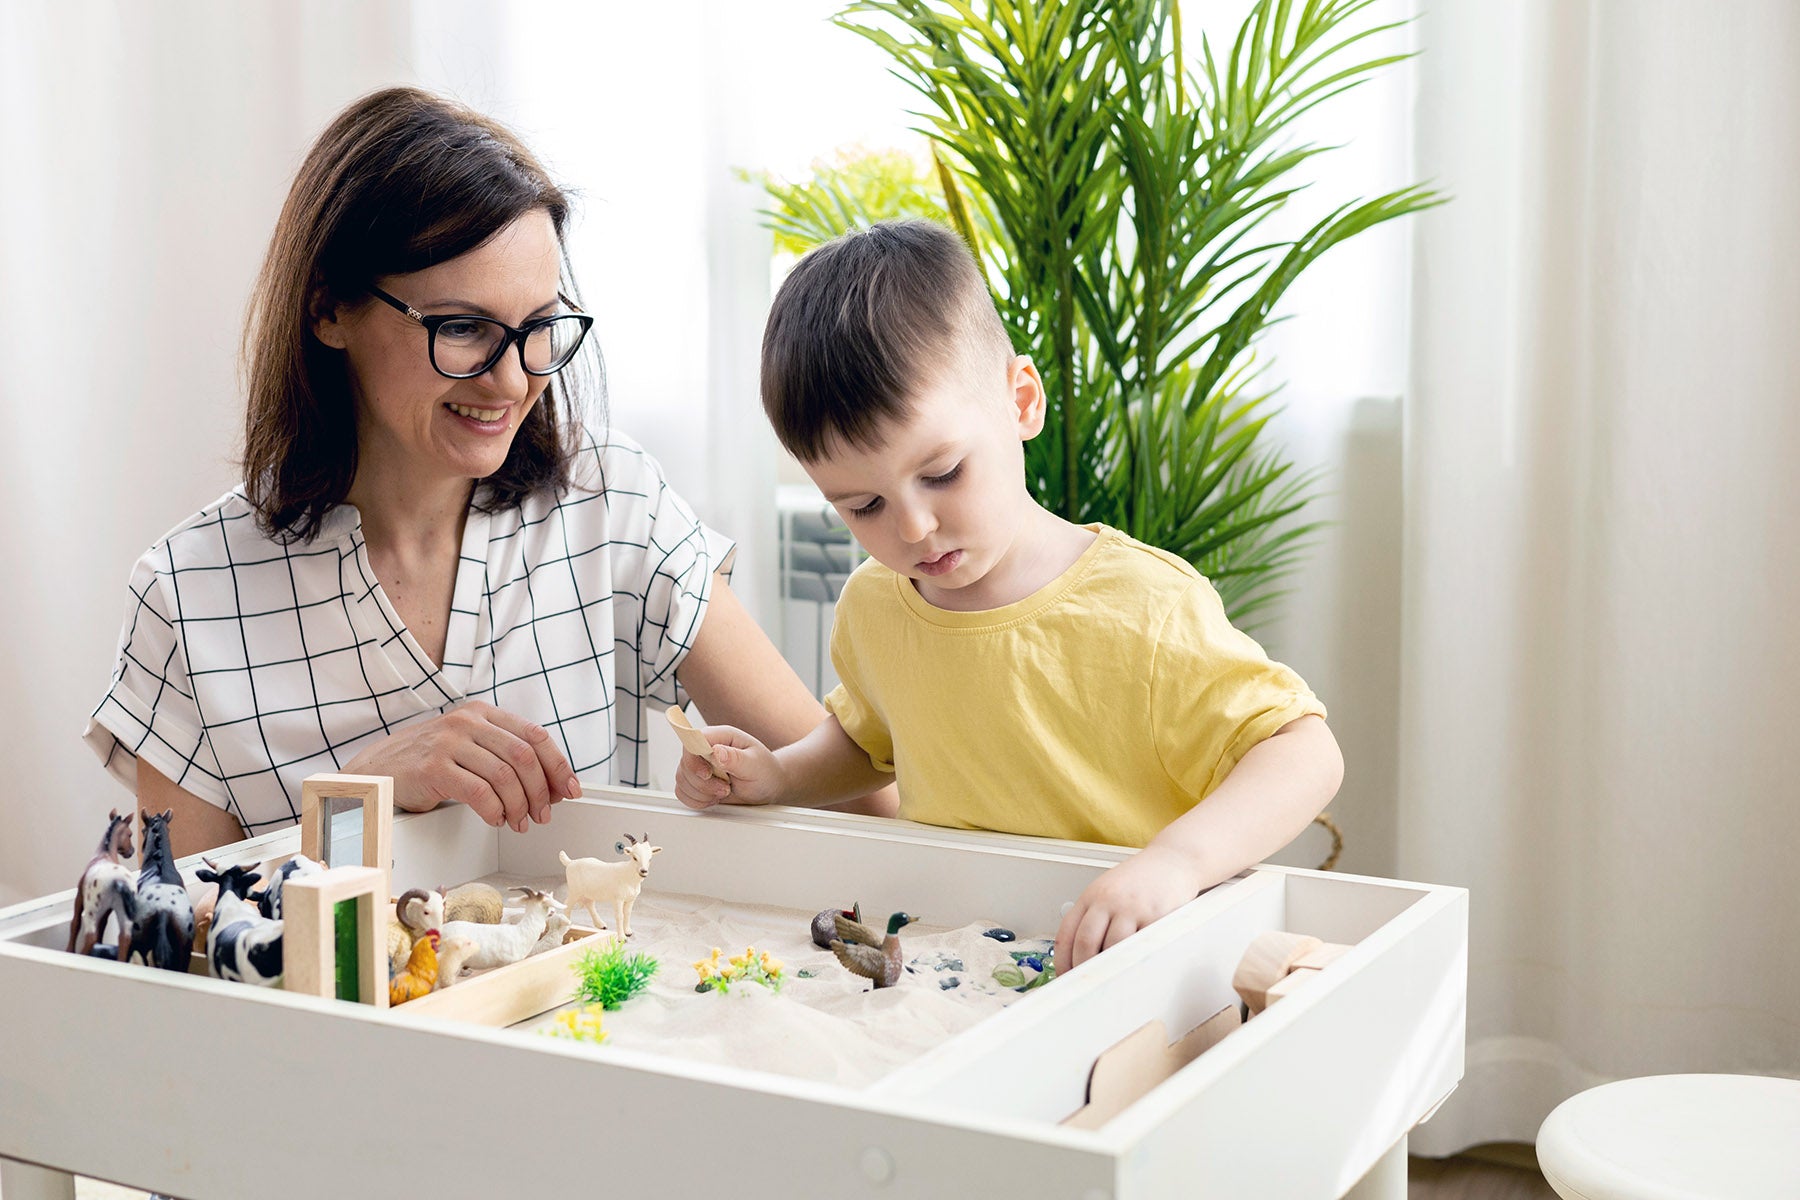 Tactile Sensory Play: Suggestions for Parents and Caregivers